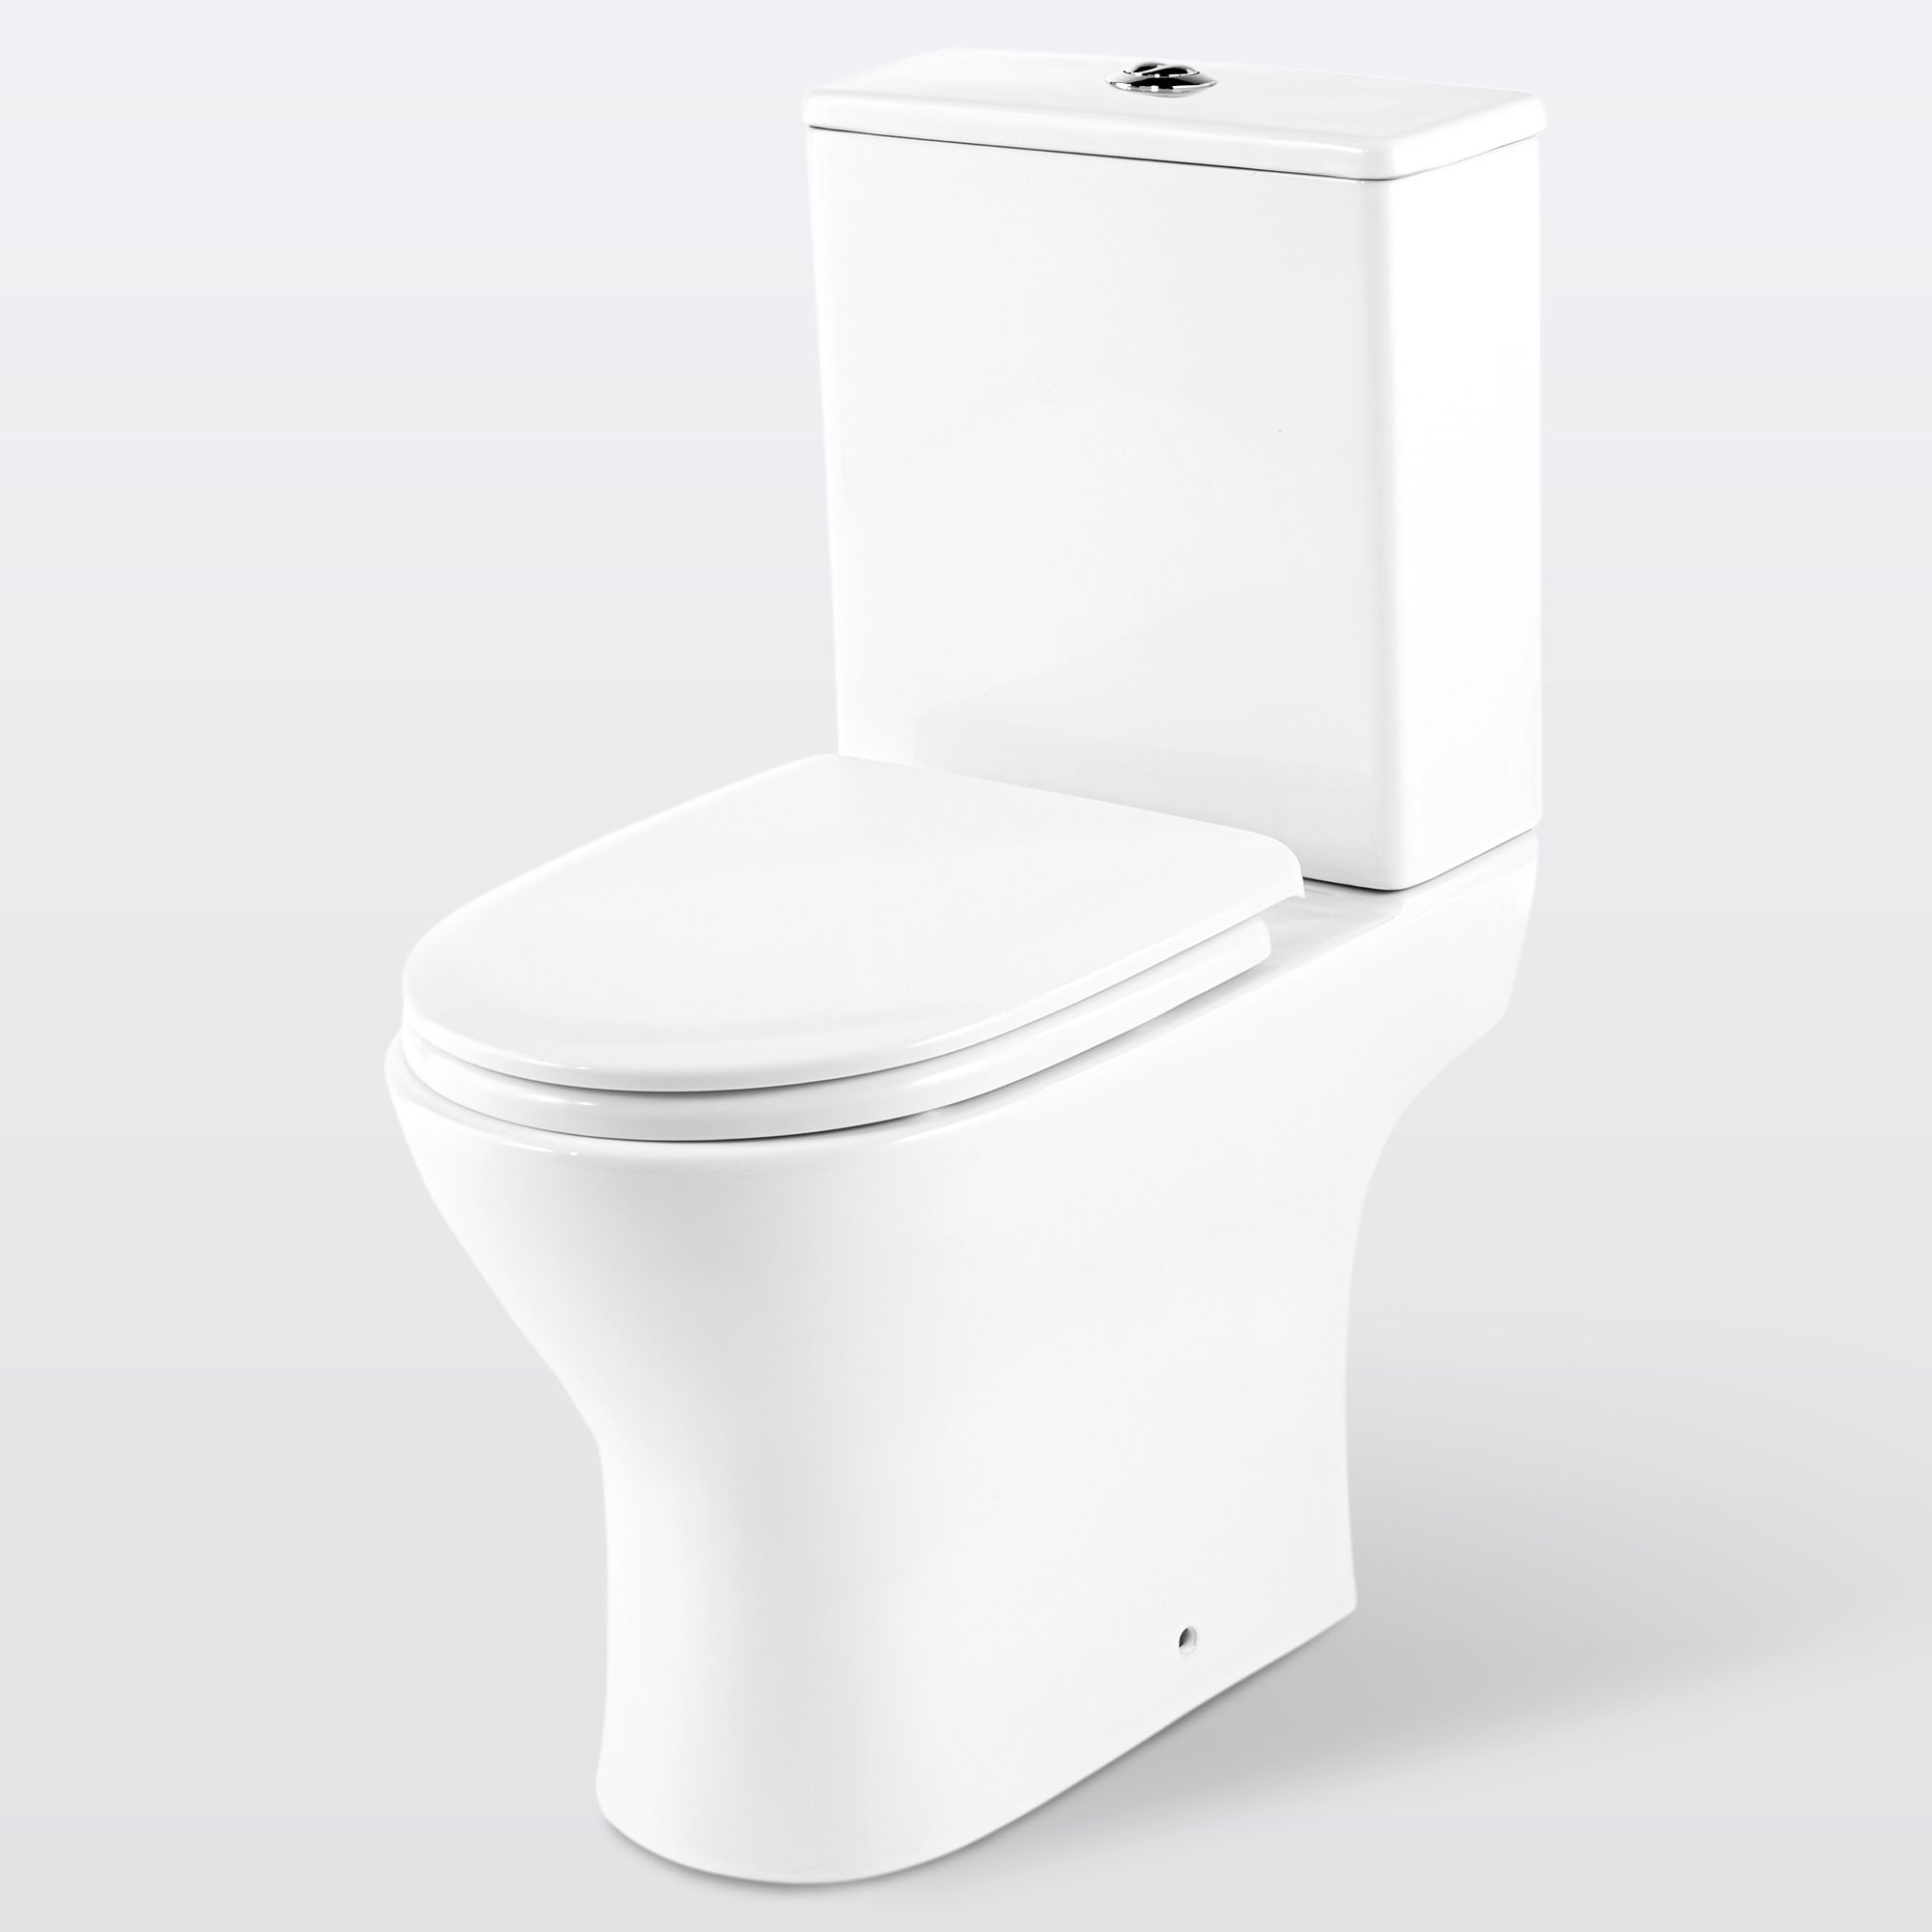 Rennen Penelope Van God GoodHome Valois Compact Close-coupled Toilet set with Soft close seat | DIY  at B&Q